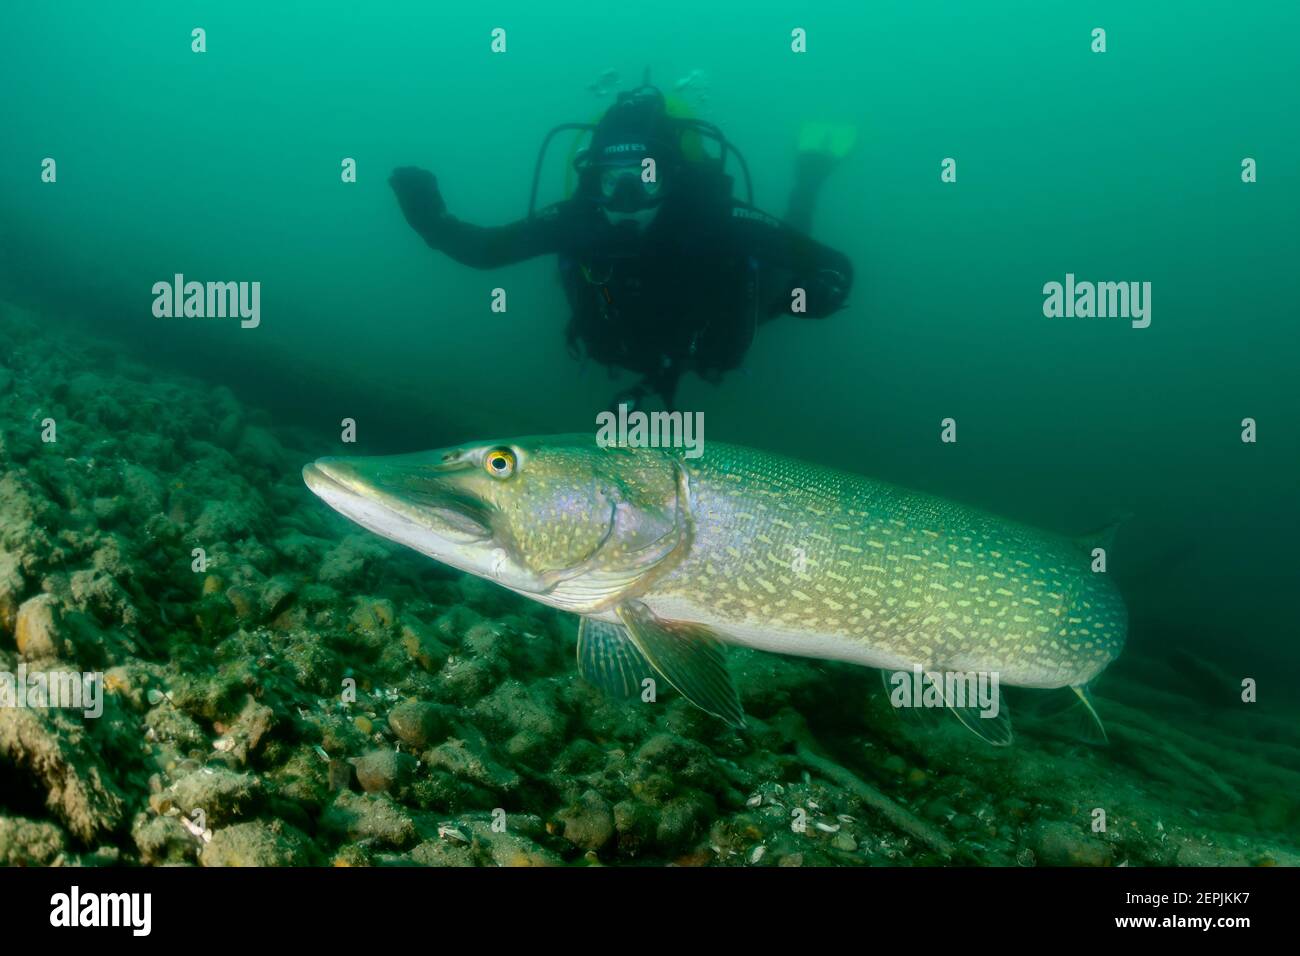 Esox lucius, Northern pike and scuba diver, St. Kanzian am Klopeiner See, Lake Klopein, Austria Stock Photo